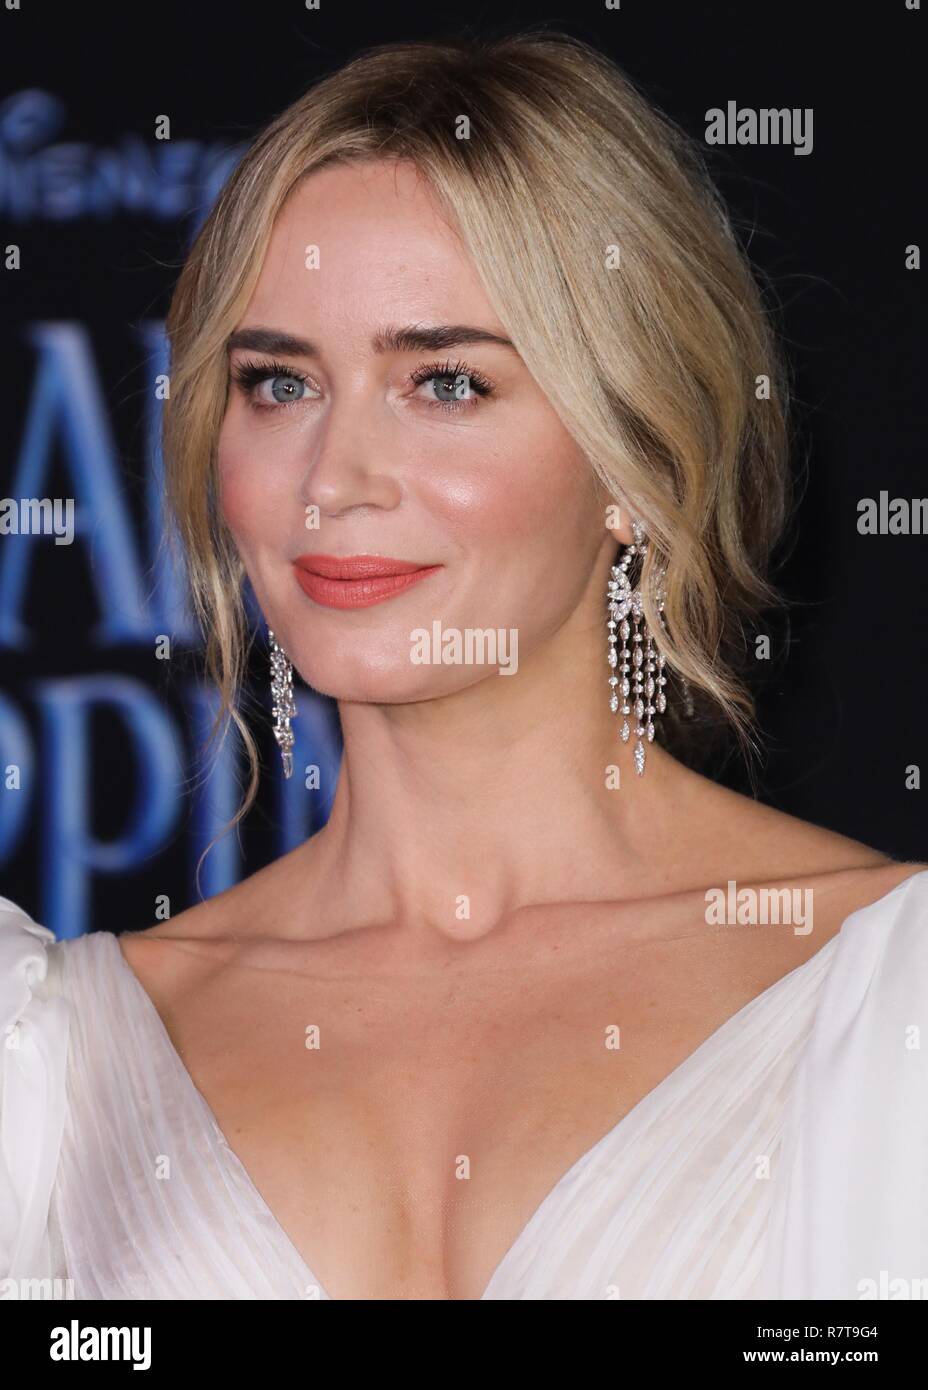 HOLLYWOOD, LOS ANGELES, CA, USA - NOVEMBER 29: Actress Emily Blunt wearing a Yanina Couture dress, Loriblu shoes, a Judith Leiber clutch, and Stephen Webster jewelry arrives at the World Premiere Of Disney's 'Mary Poppins Returns' held at the El Capitan Theatre on November 29, 2018 in Hollywood, Los Angeles, California, United States. (Photo by David Acosta/Image Press Agency) Stock Photo